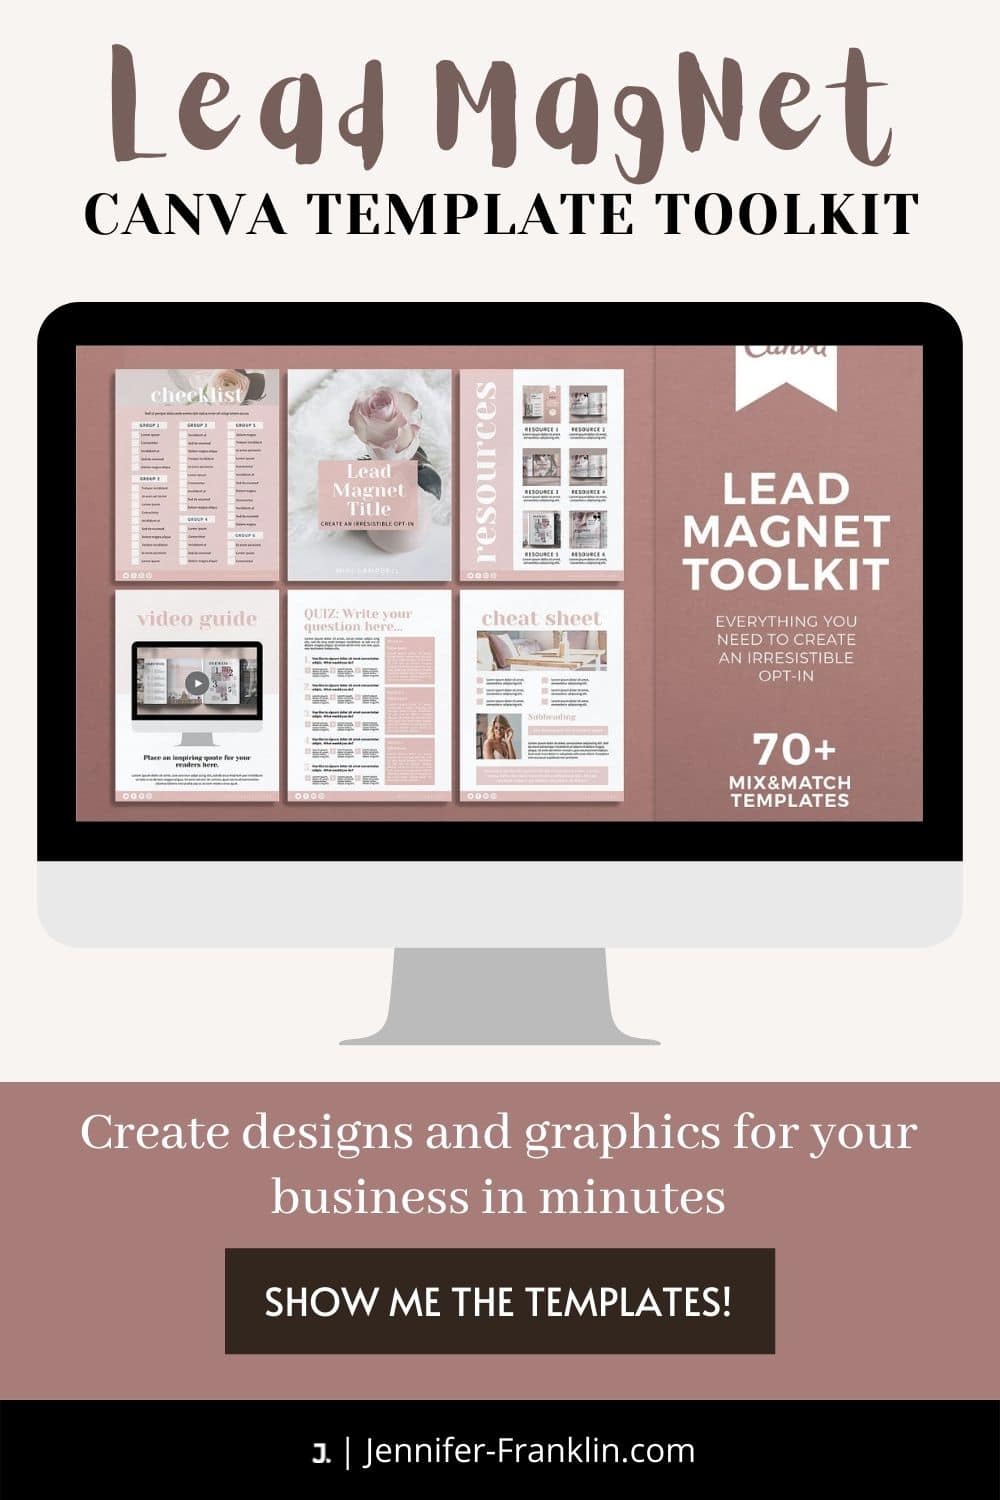 Lead Magnet Canva Template Toolkit